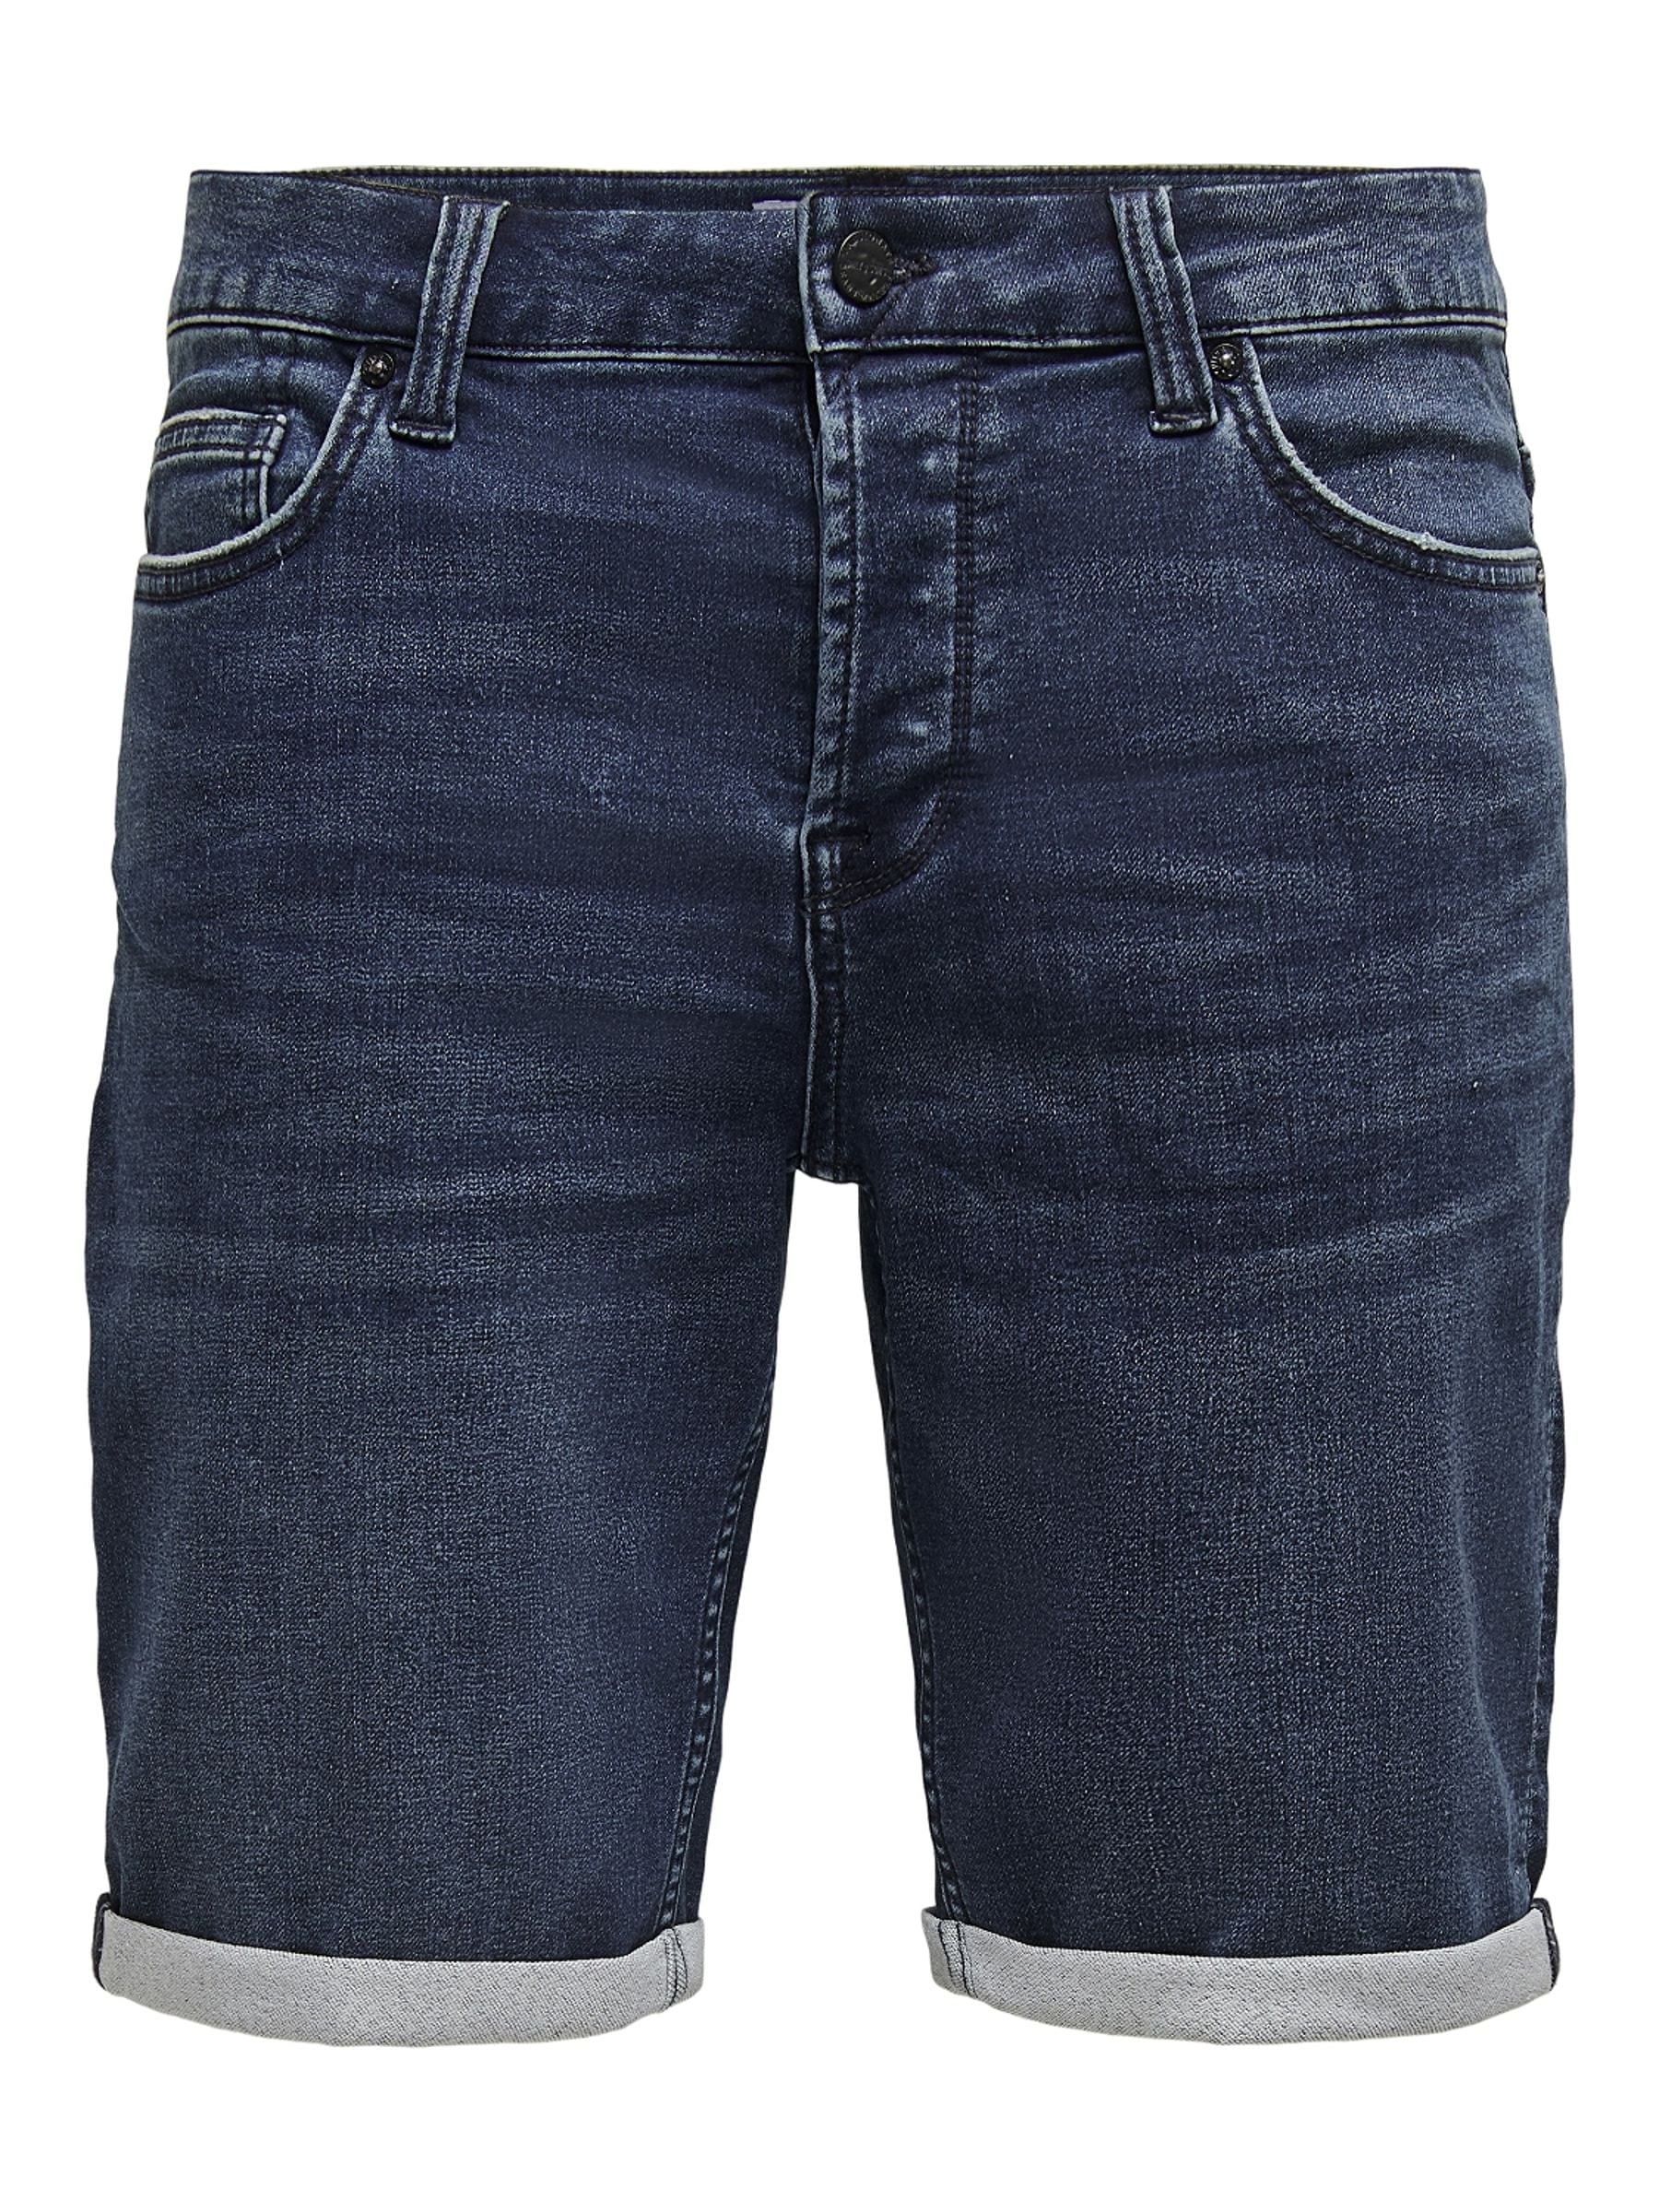 ONLY & SONS Jeansshorts »ONSPLY LIGHT BLUE 5189 SHORTS DNM NOOS«